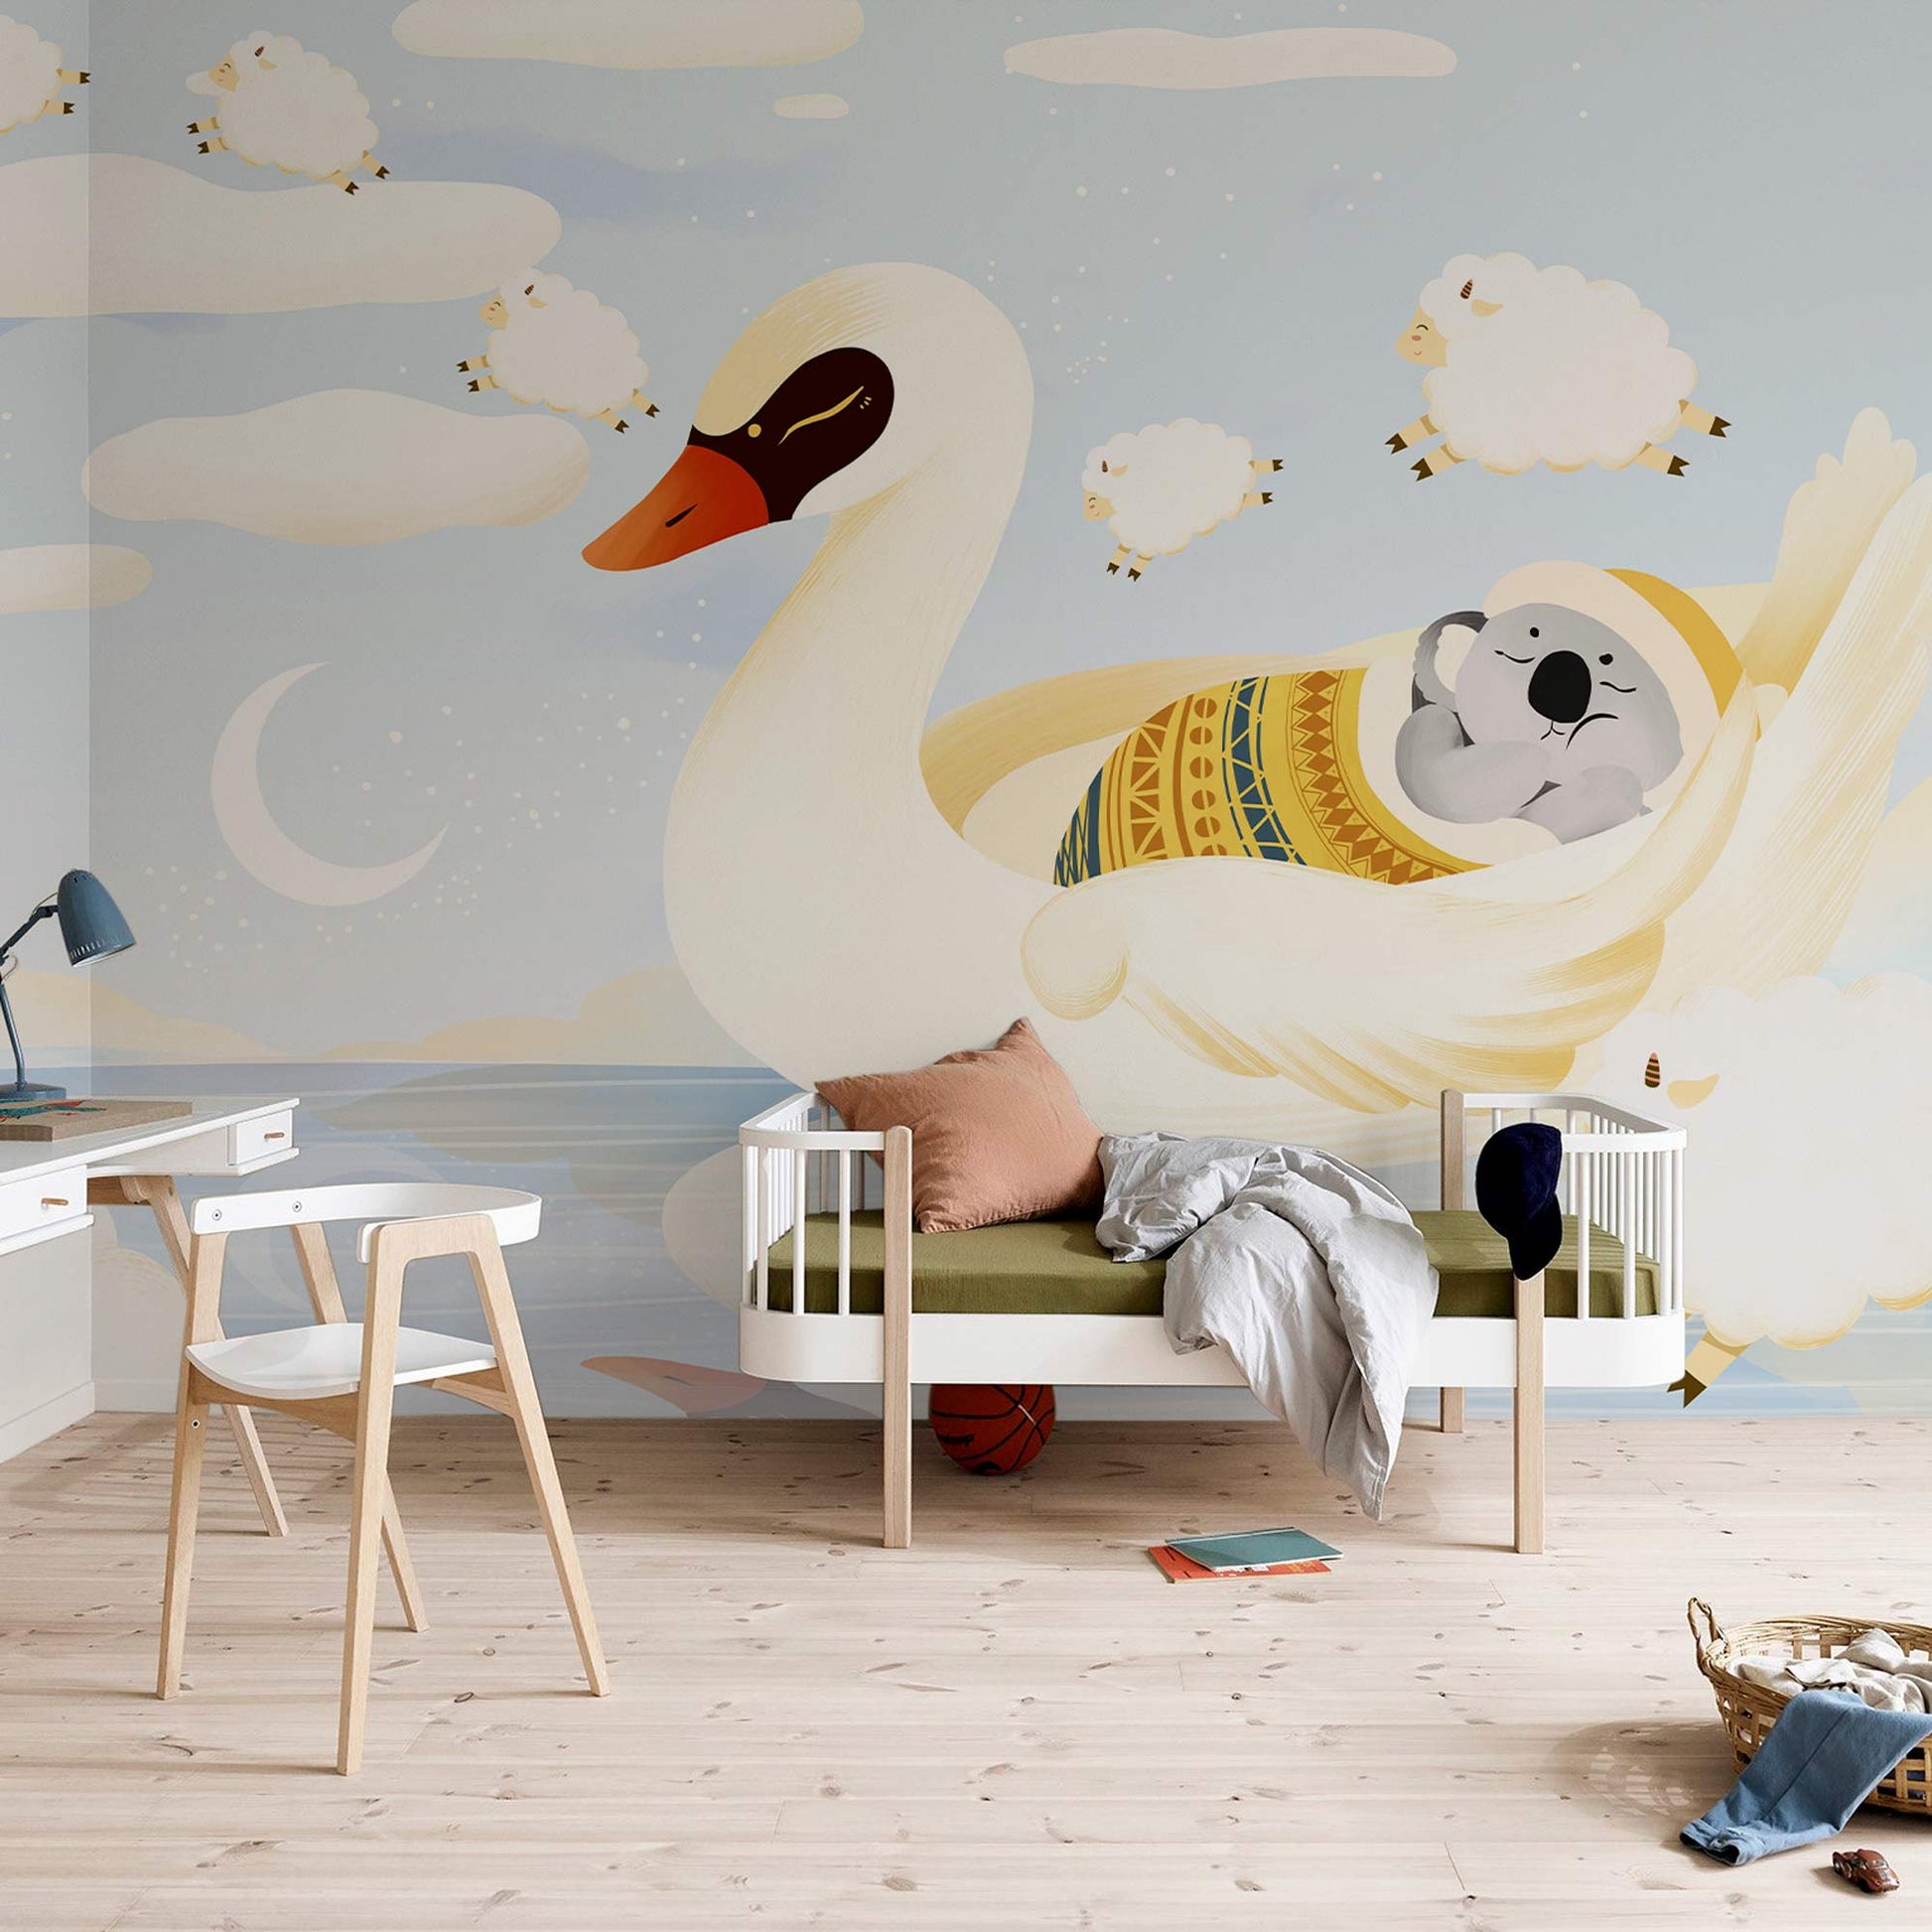 Wallpaper mural with sleeping animals that may be used for decorating children's rooms